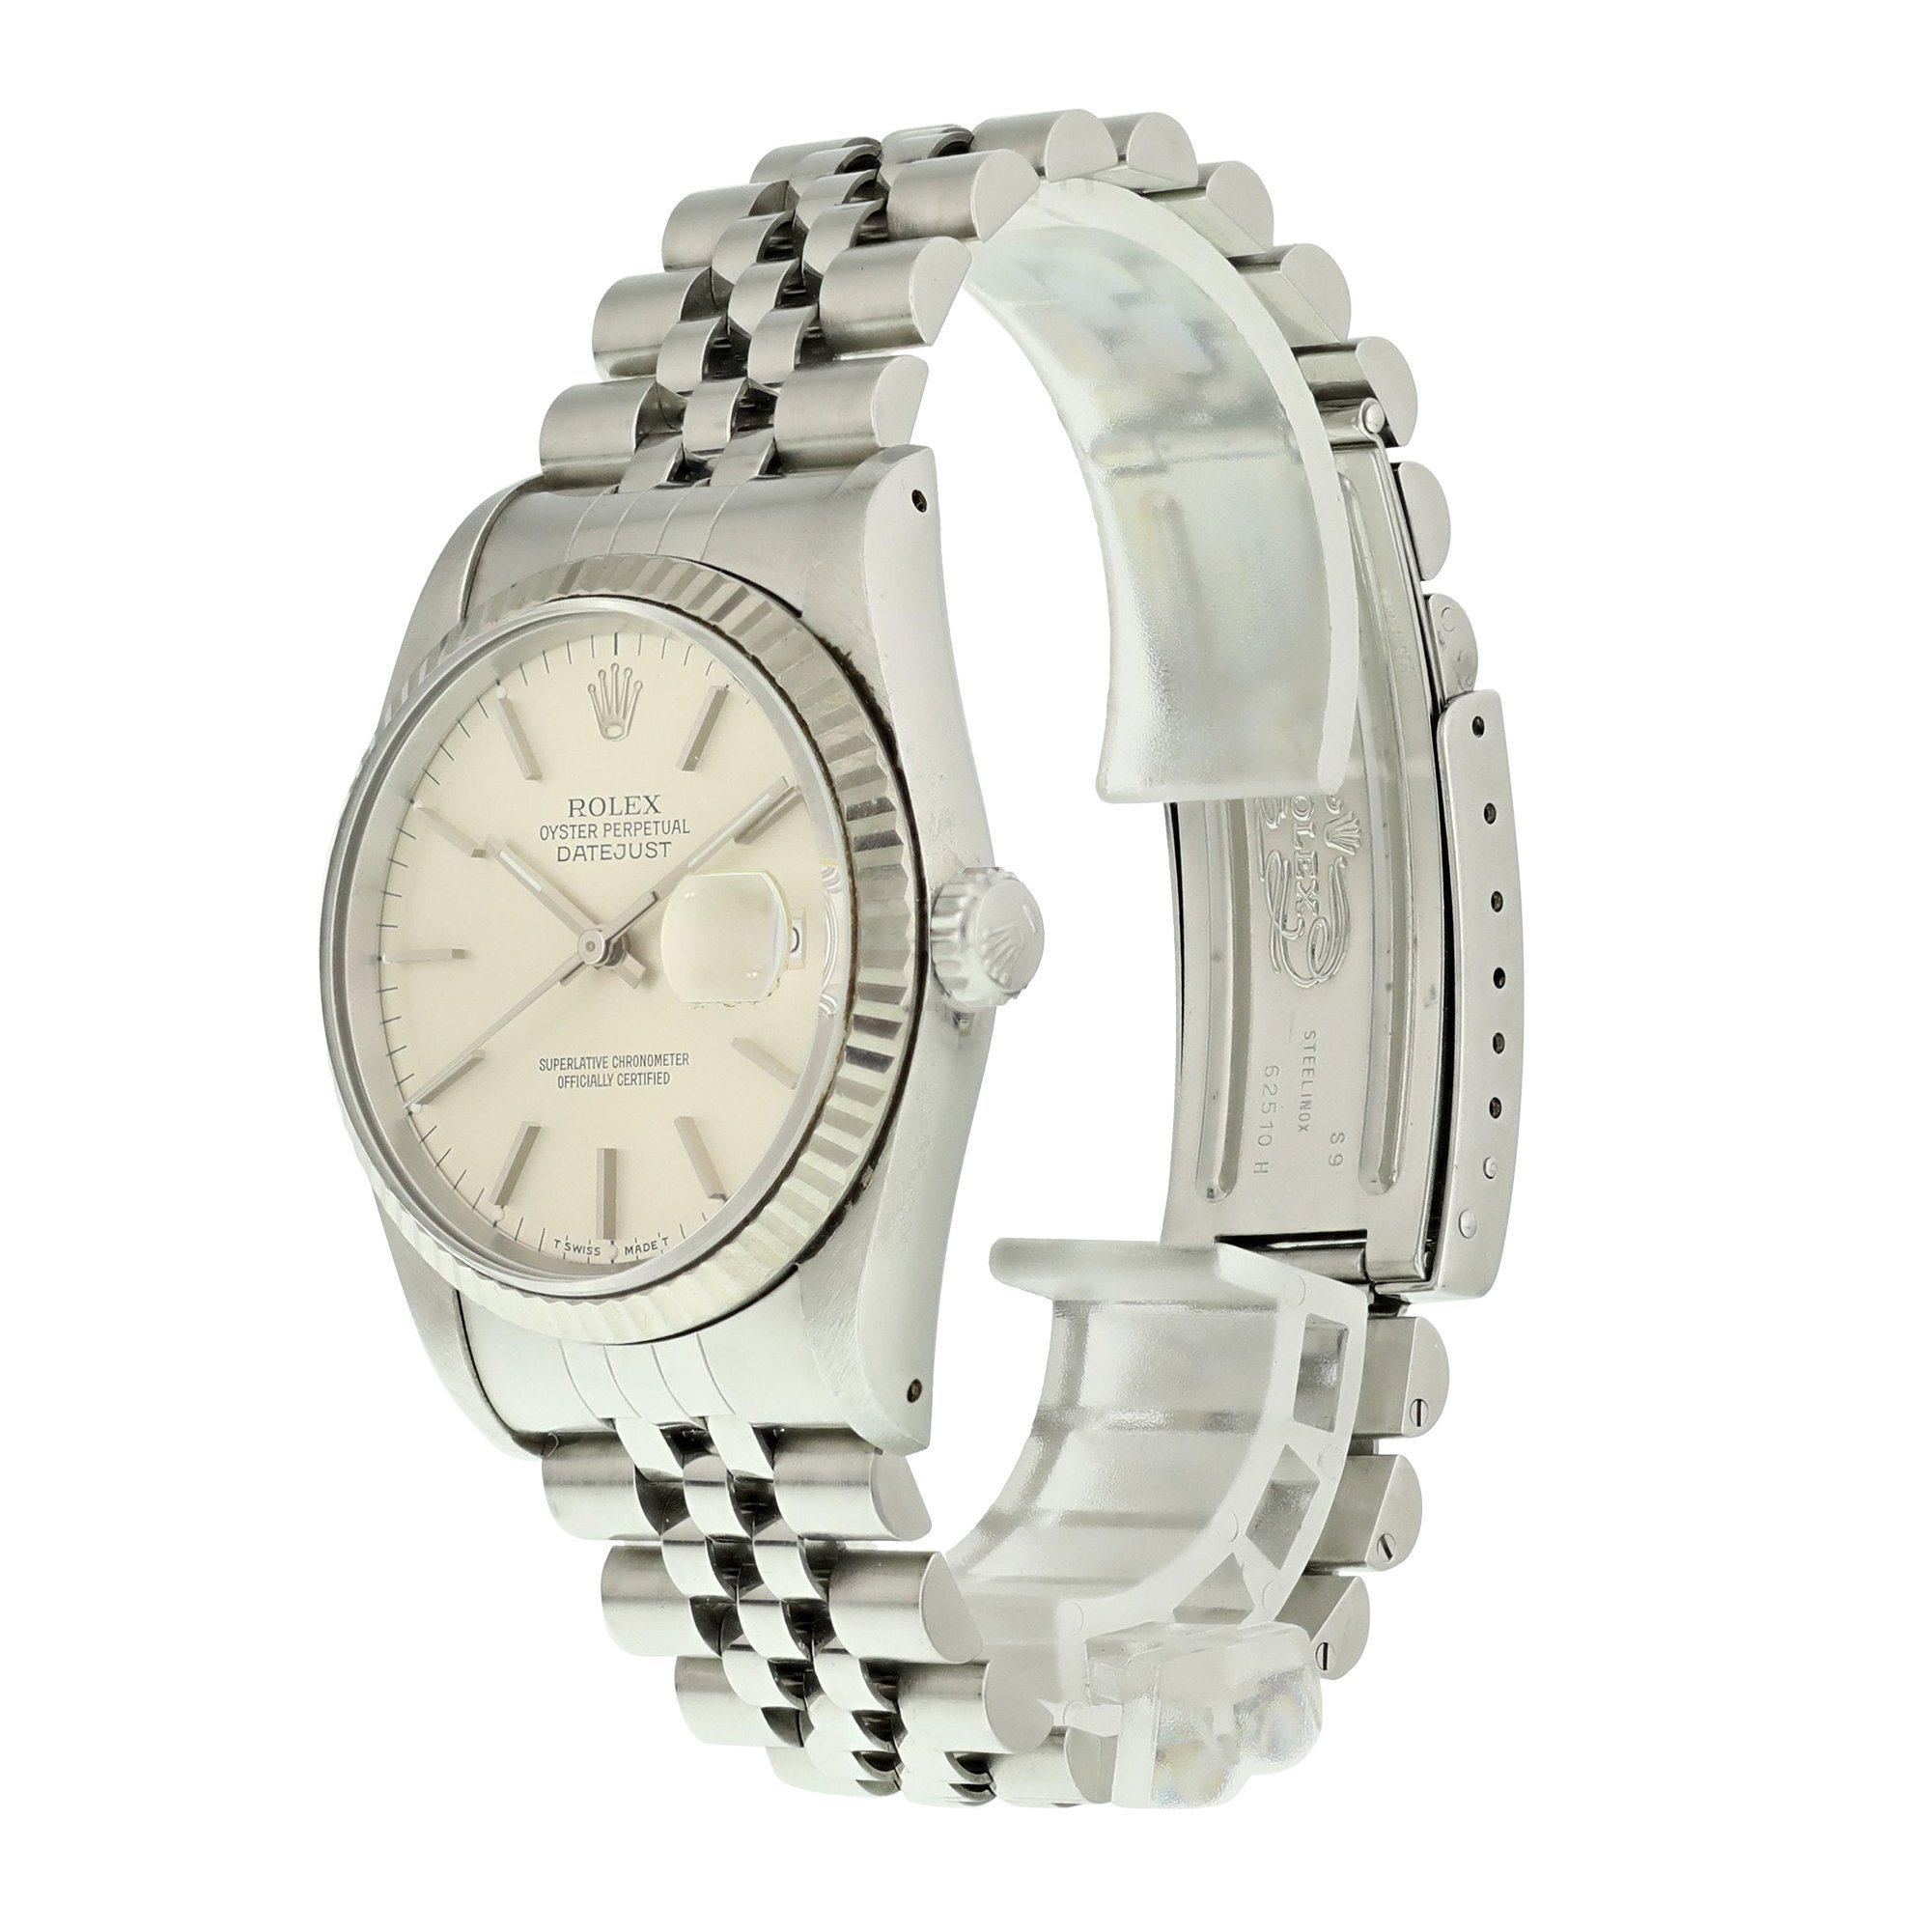 Rolex Oyster Perpetual Datejust 16234 Men's Watch For Sale 1